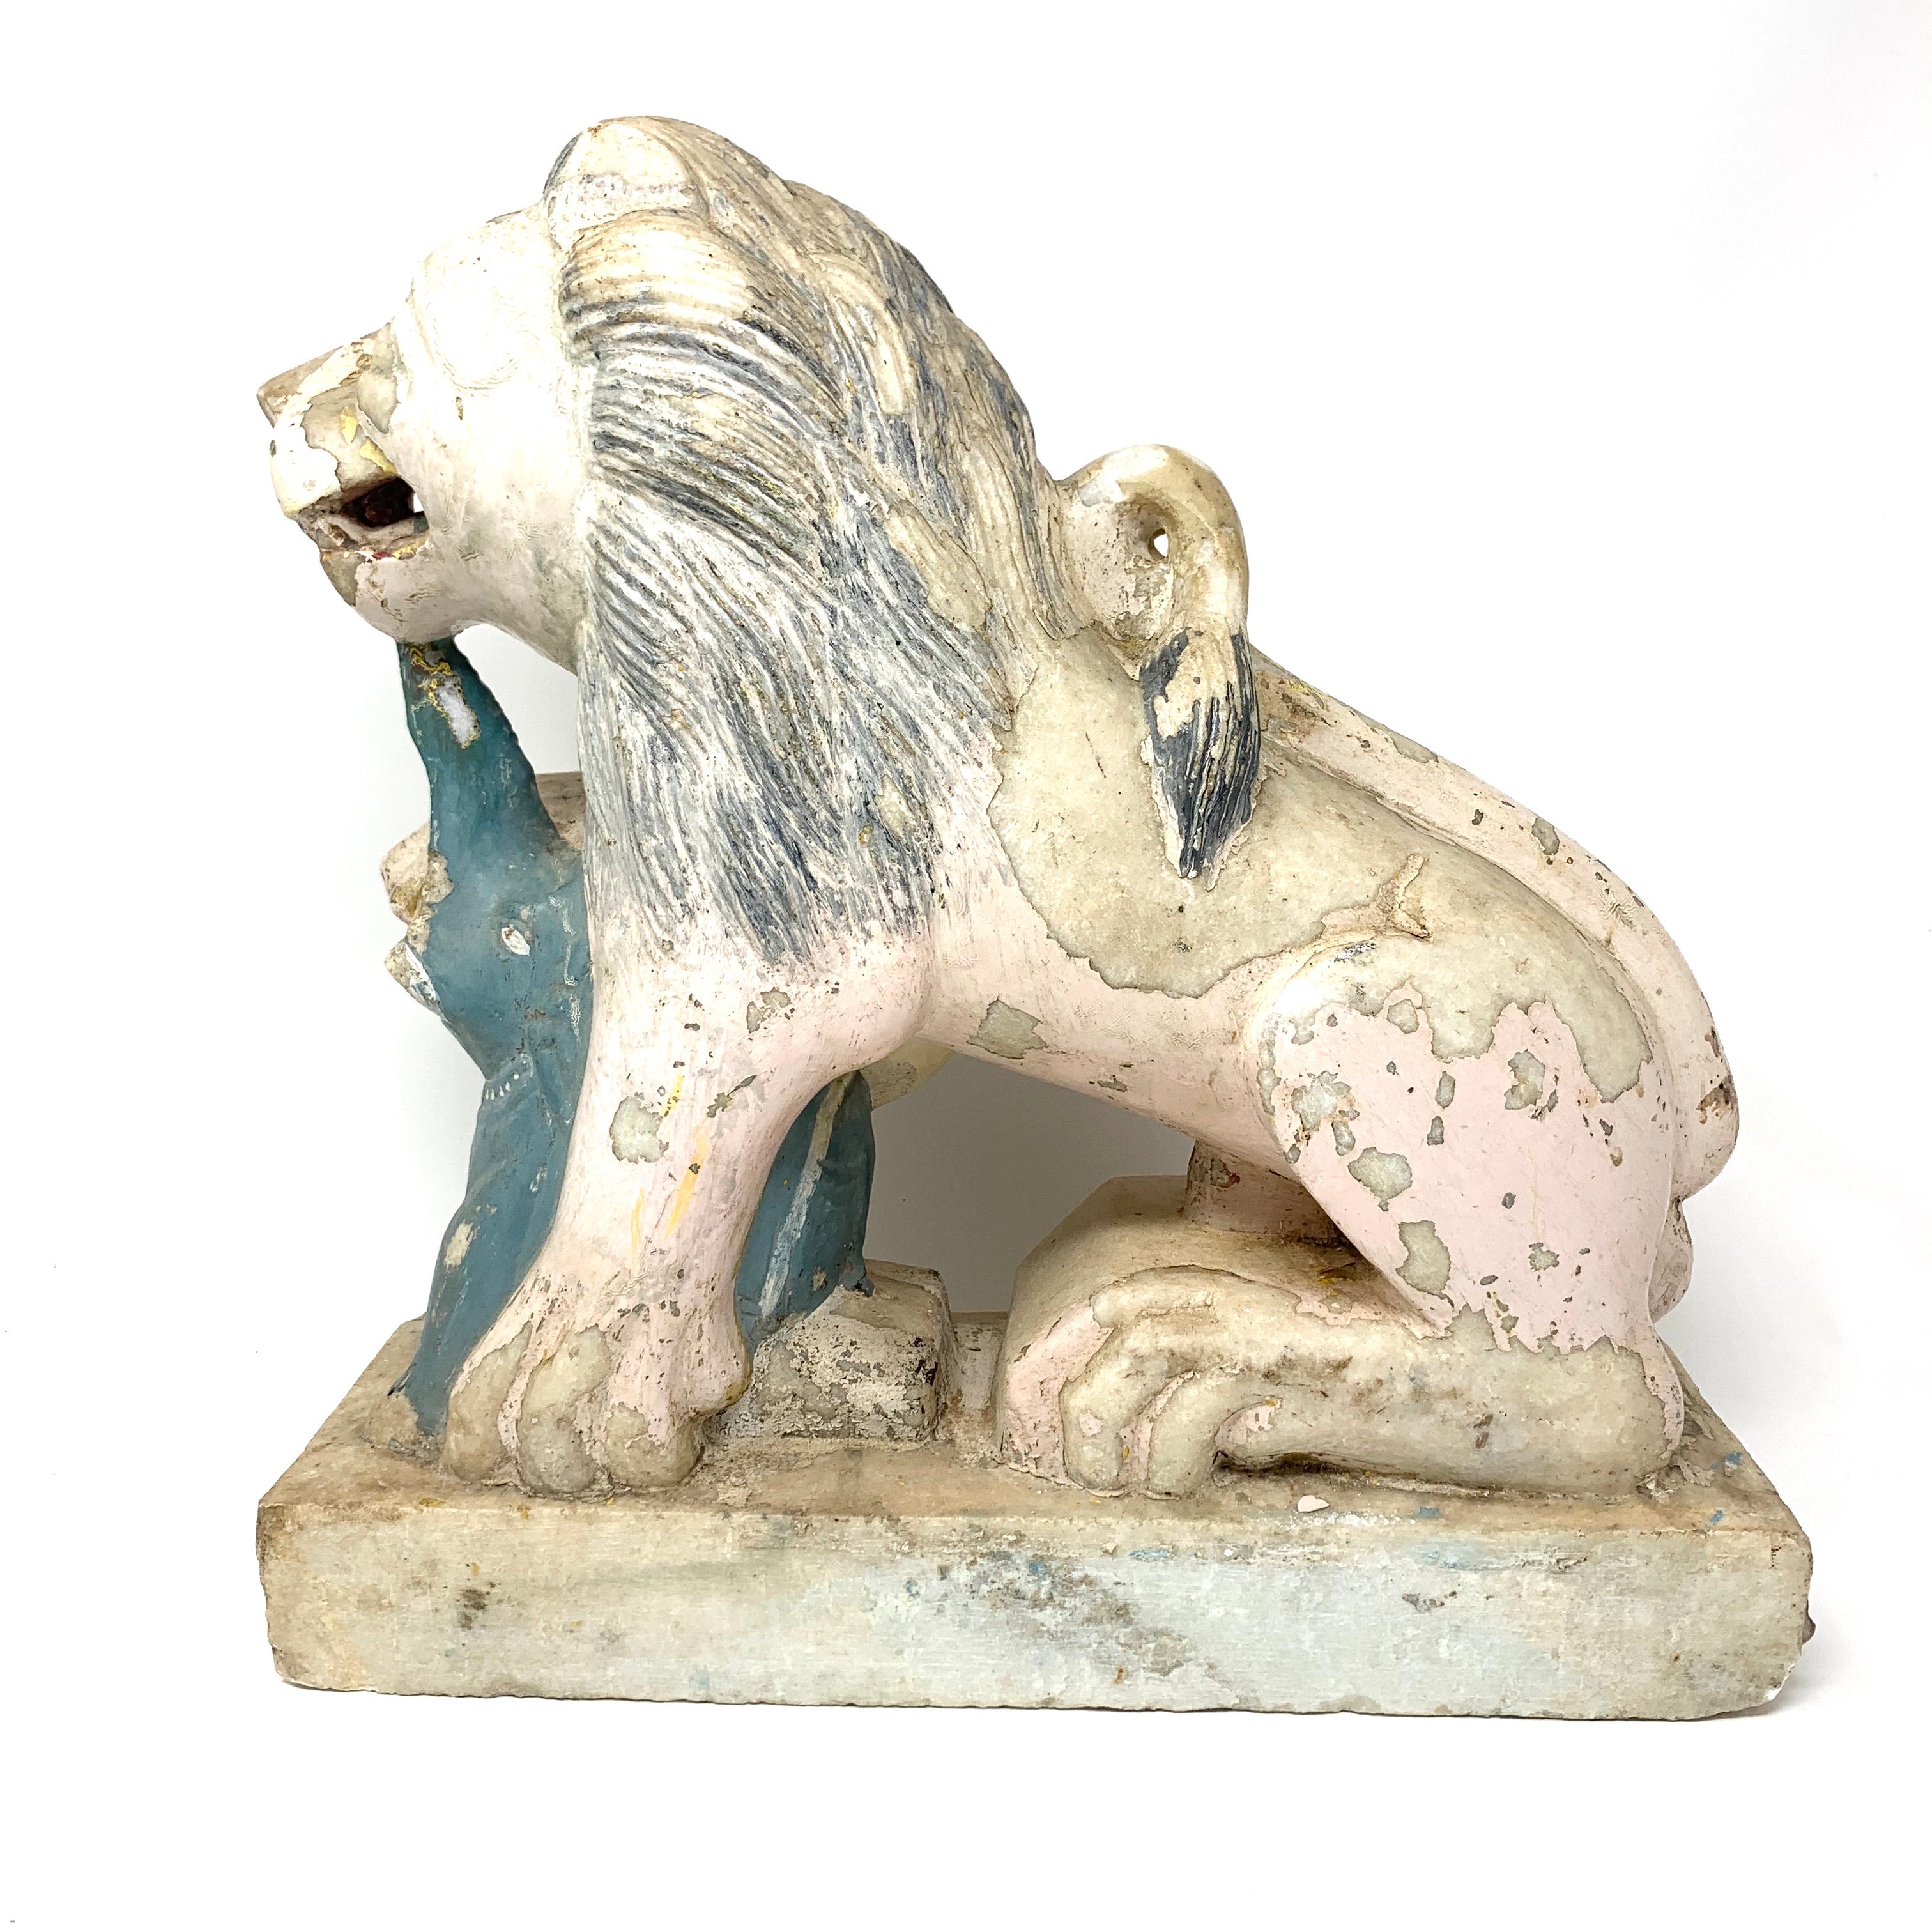 Antique Sitting Lion in Sculpted Stone and Lacquer 19th Century